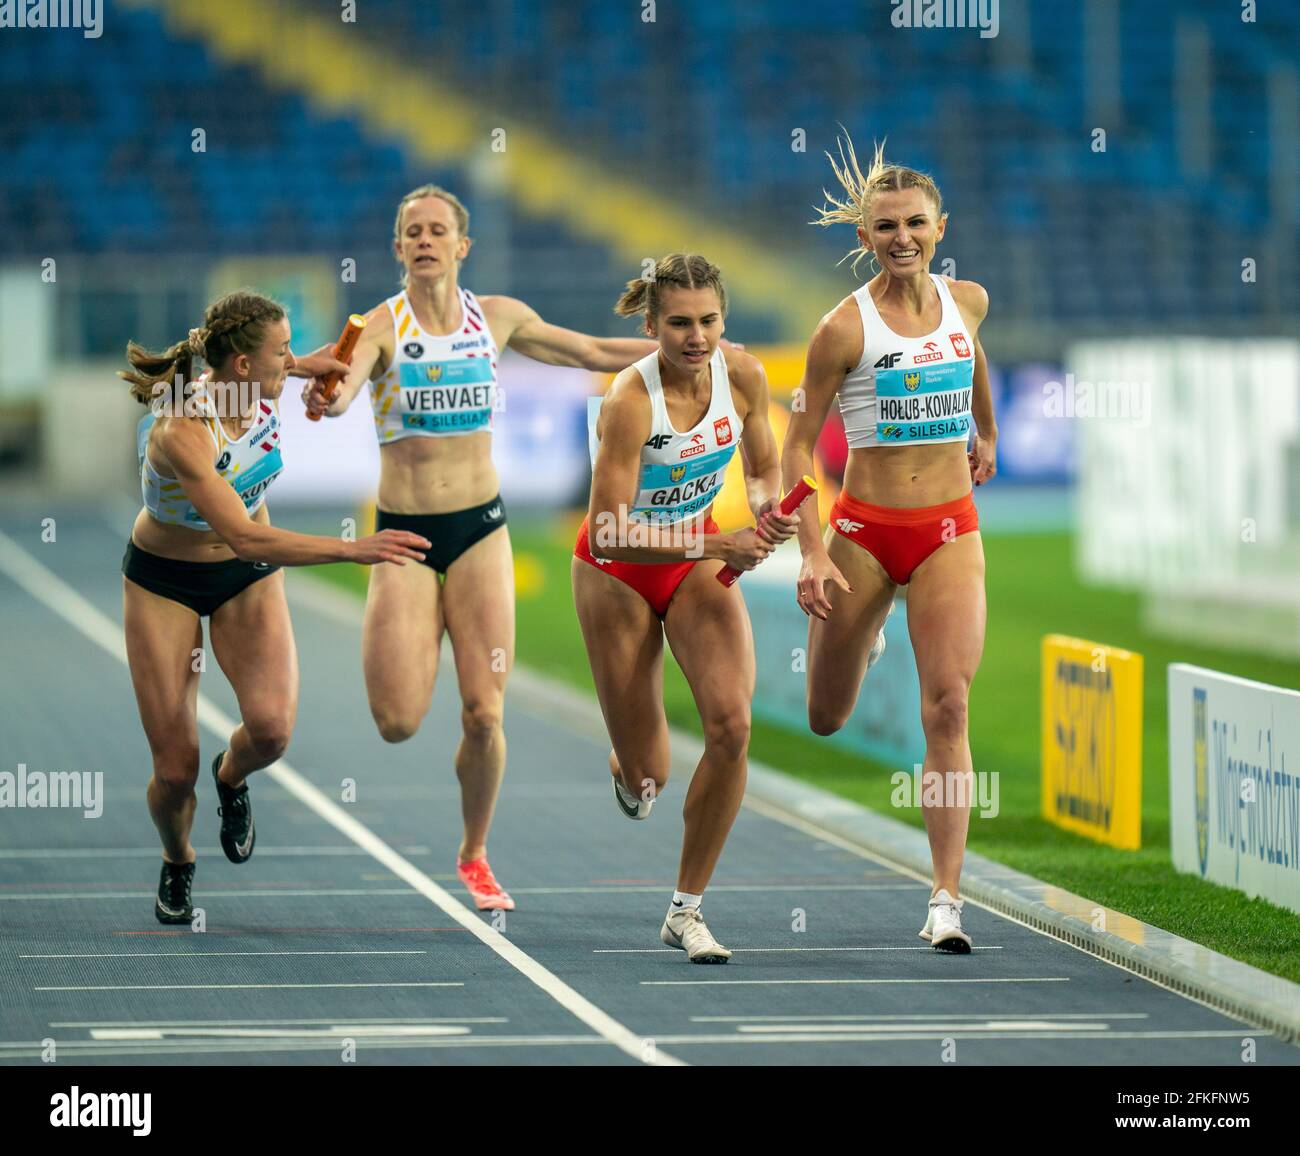 Silesian Stadium, Chorzow, Poland. 1st May, 2021. World Athletics Relays 2021. Day 1; Ladies 4x400 baton exchange as Holub-Kowalik hands to Gacka (Pol) and Vervaet hands over to Laus (Bel) Credit: Action Plus Sports/Alamy Live News Stock Photo